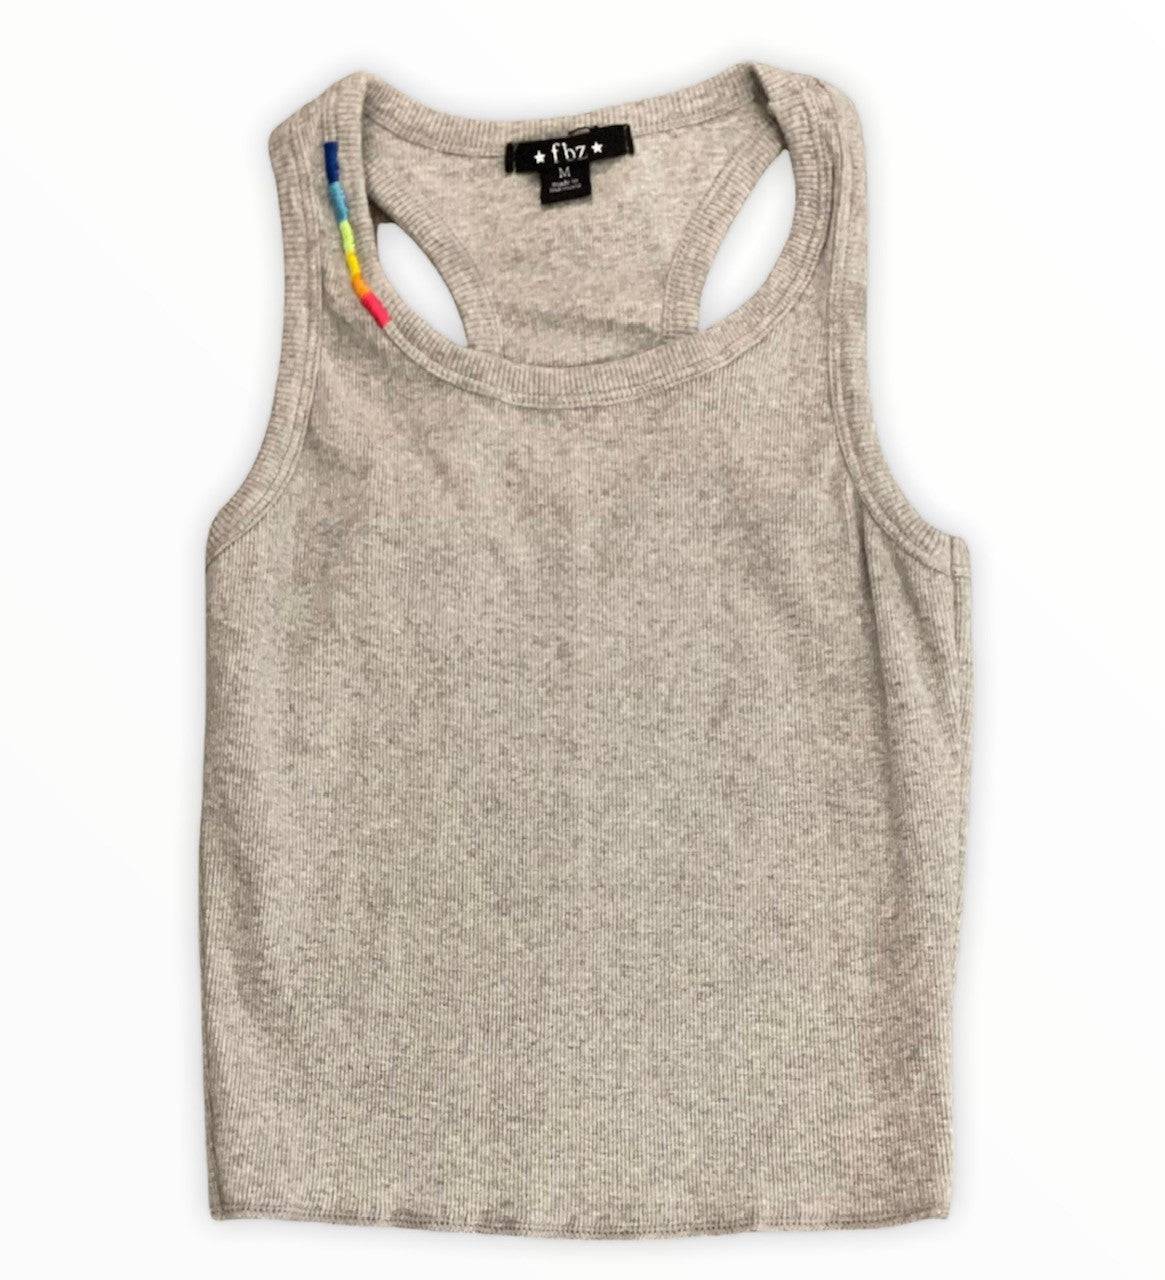 Stitched Up Tank - Heather Grey - Twinkle Twinkle Little One